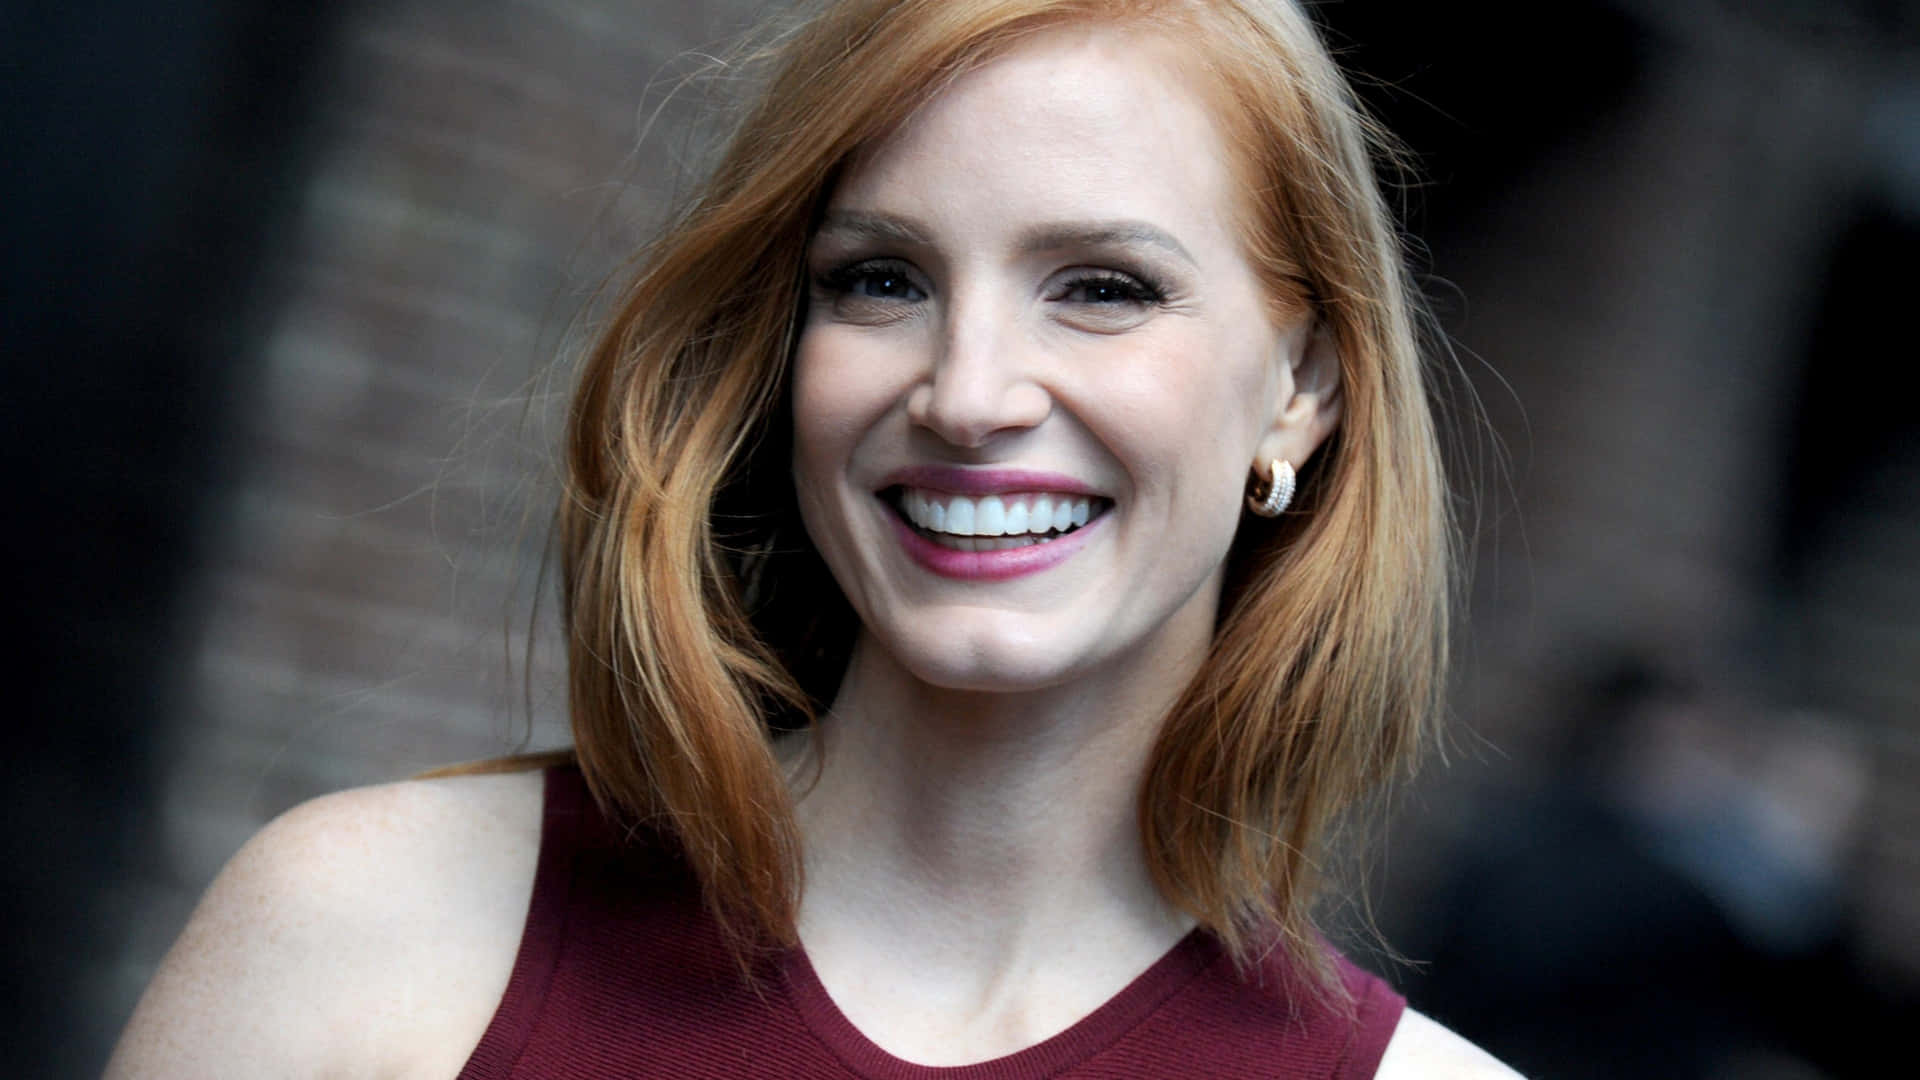 Jessica Chastain striking a pose Wallpaper